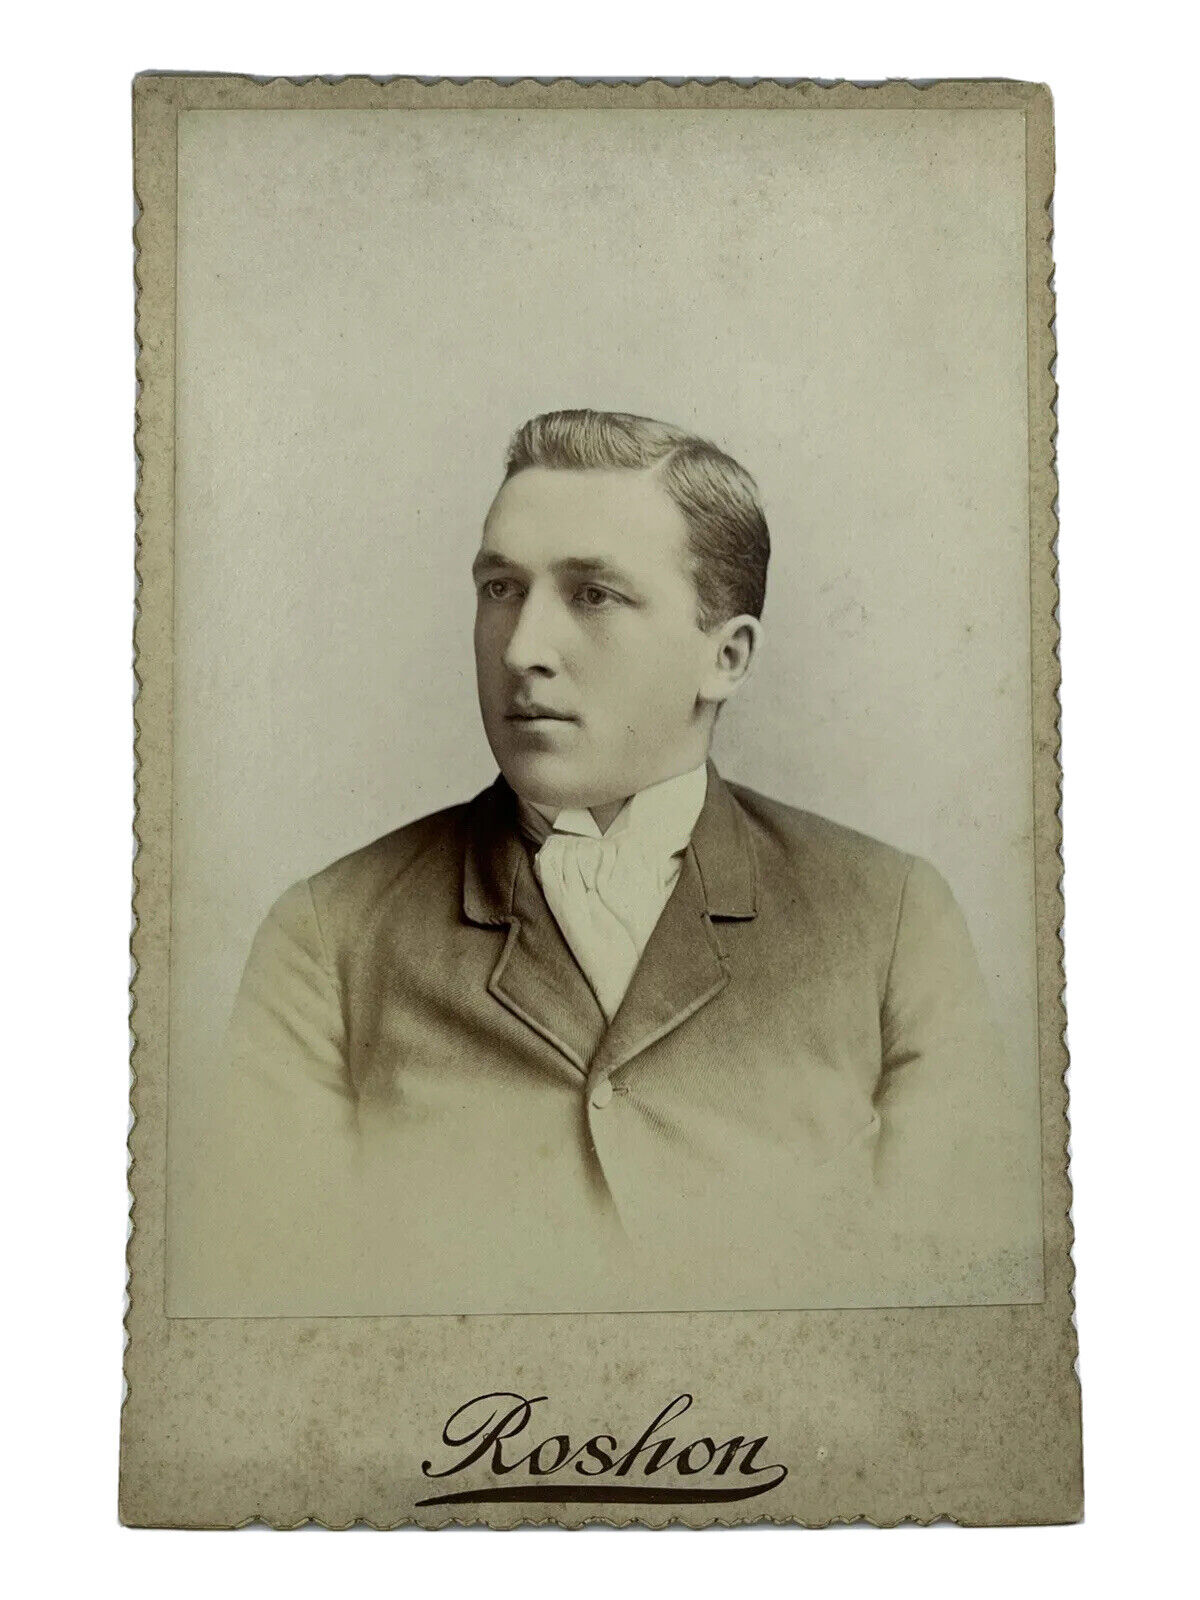 LEBANON PA 1880s 1890s Victorian Young Man Suit Tie Cabinet Card